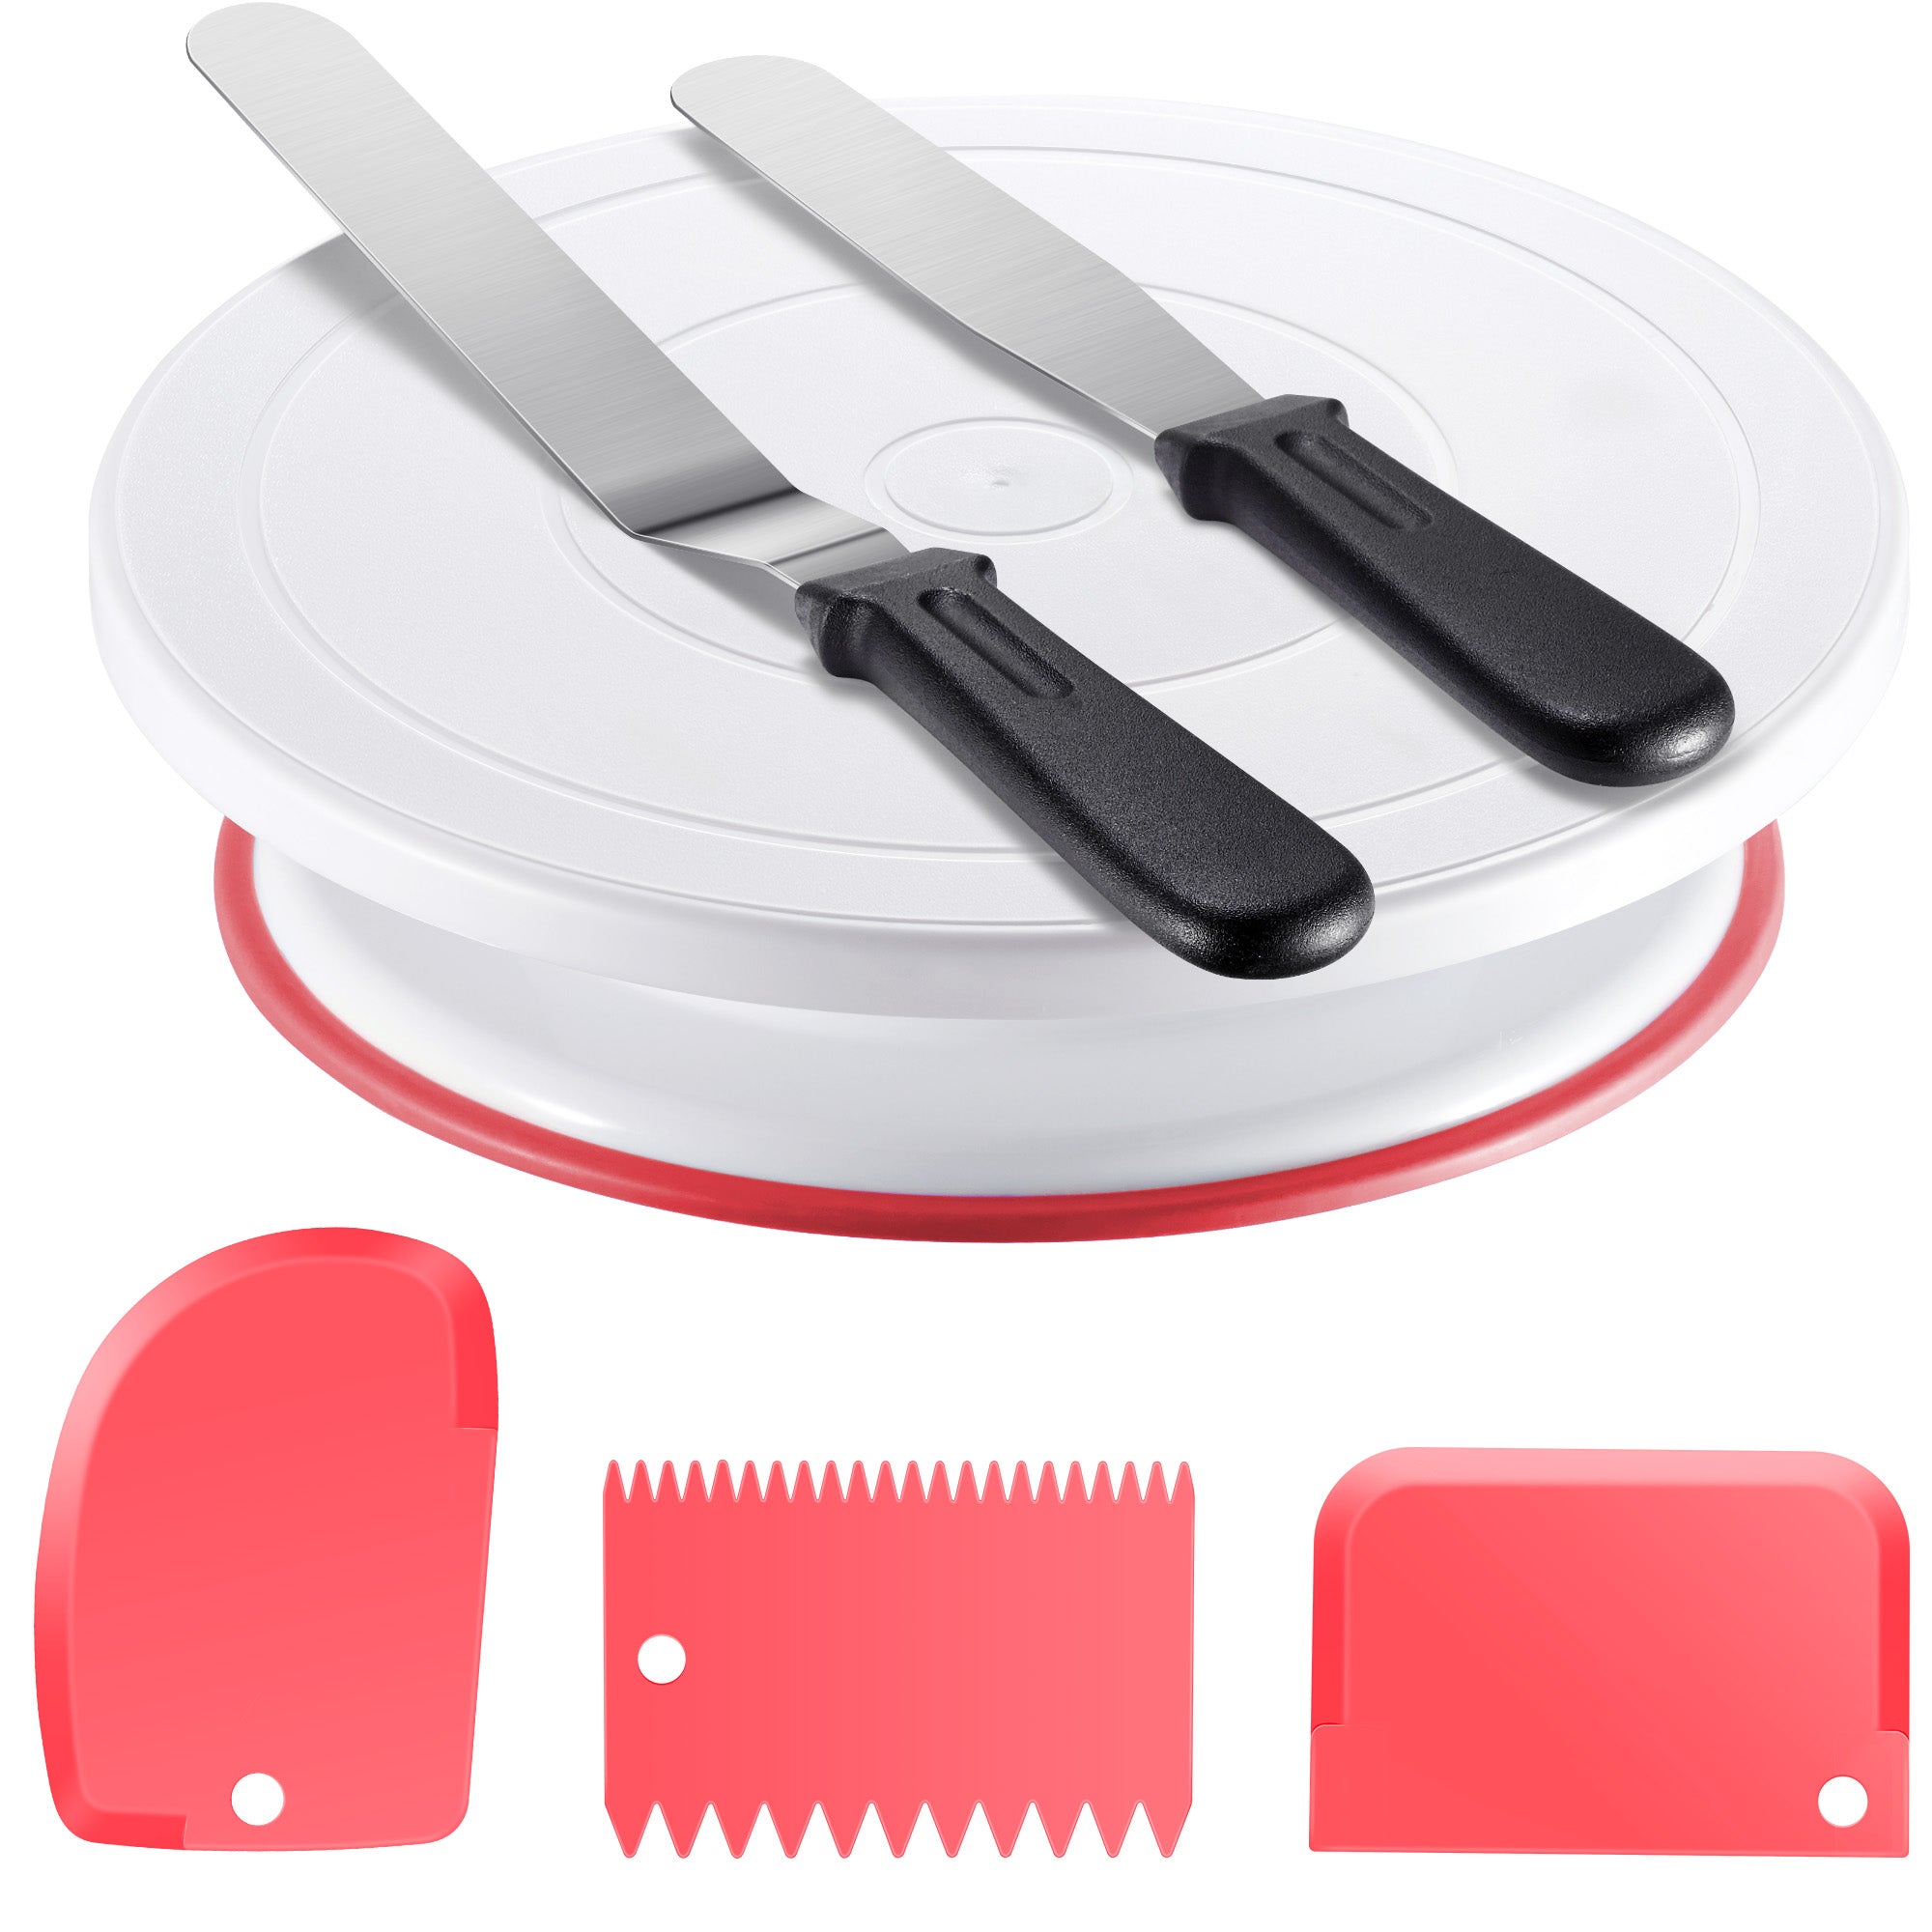 Kootek Cake Decorating Kit Baking Supplies Cake Turntable with 2 Frosting Straight Angled Spatula 3 Icing Smoother Scrapers Baking Accessories Tools for Beginners and Pros, Pink